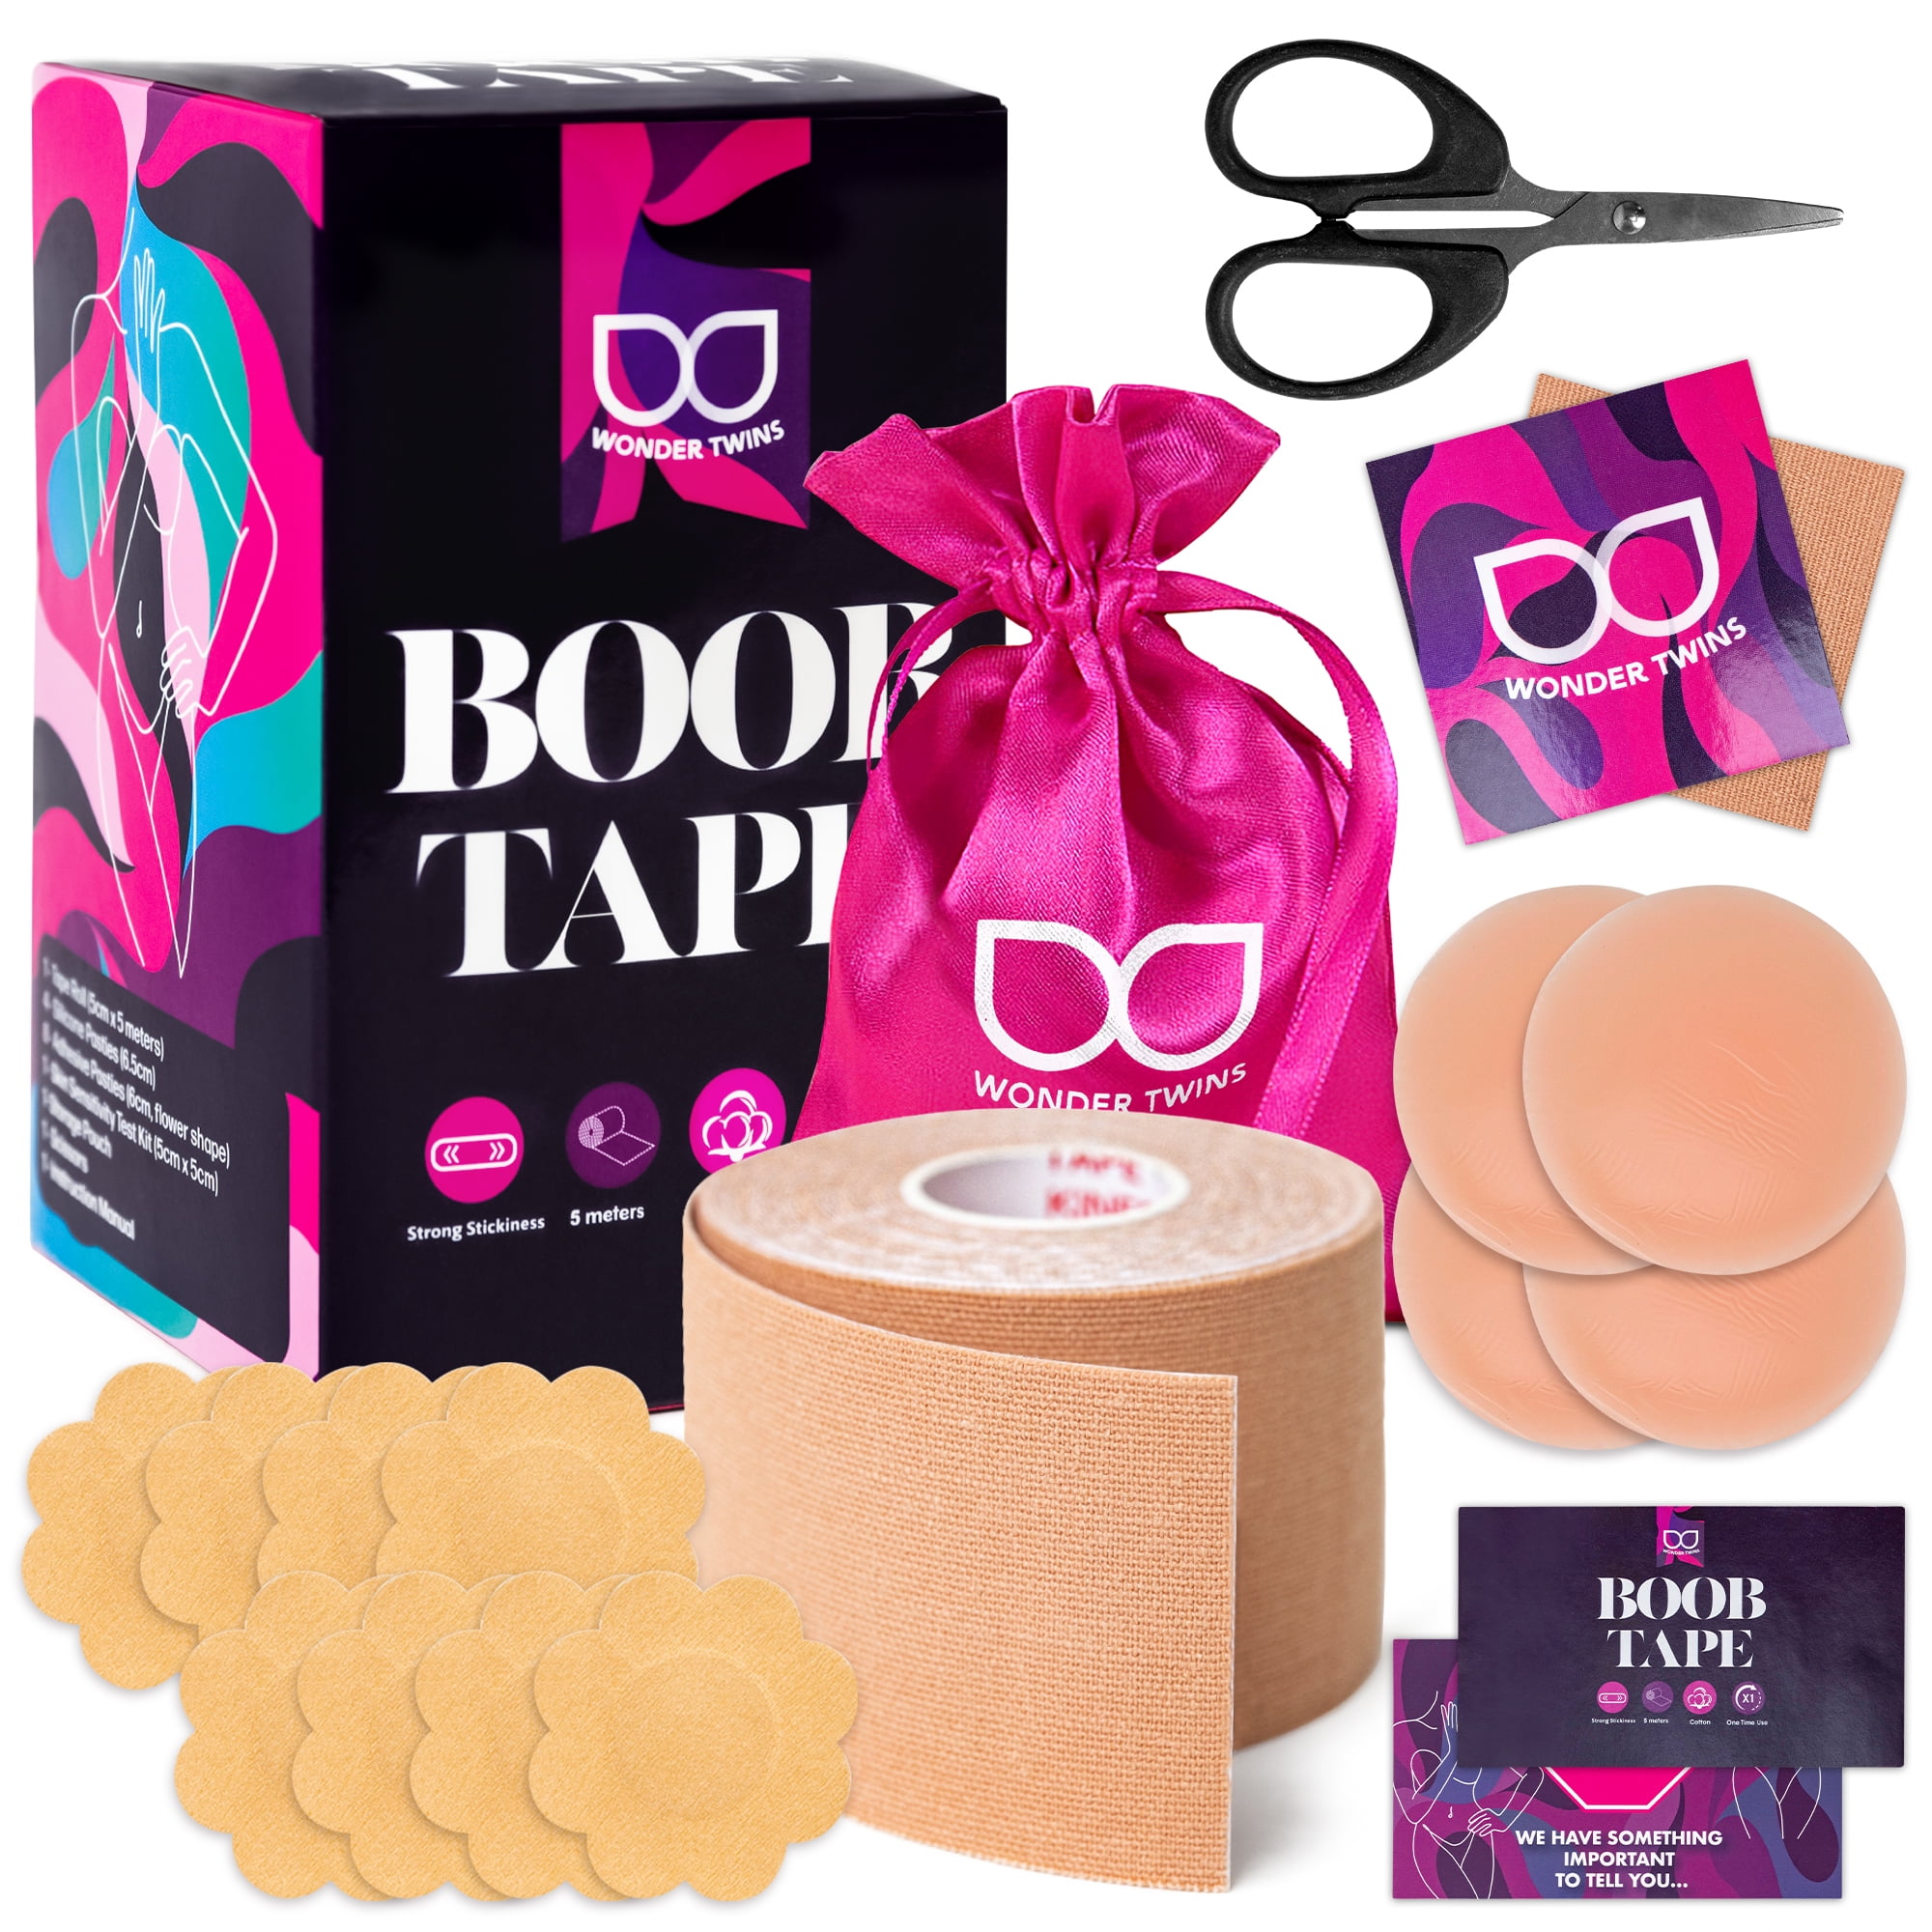 This is a boob tape. A boob tape is not for everyone. Definitely